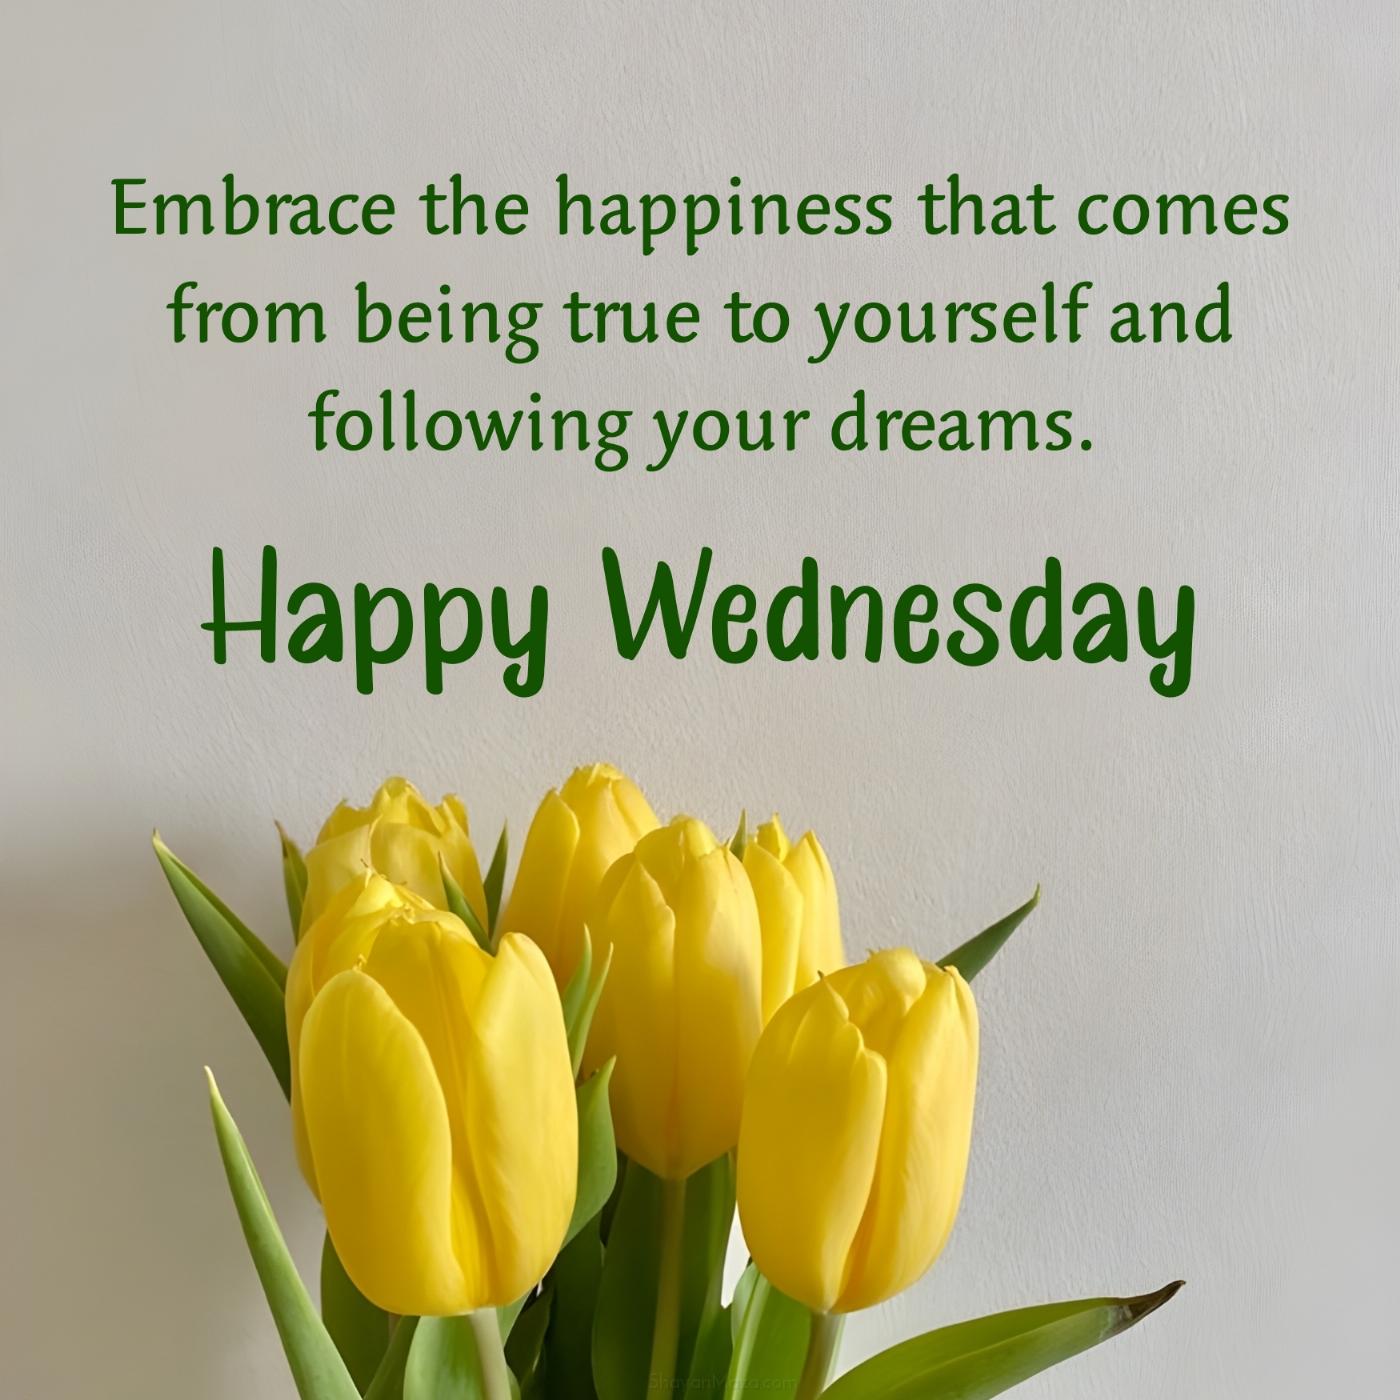 Happy Wednesday! Embrace the happiness that comes from